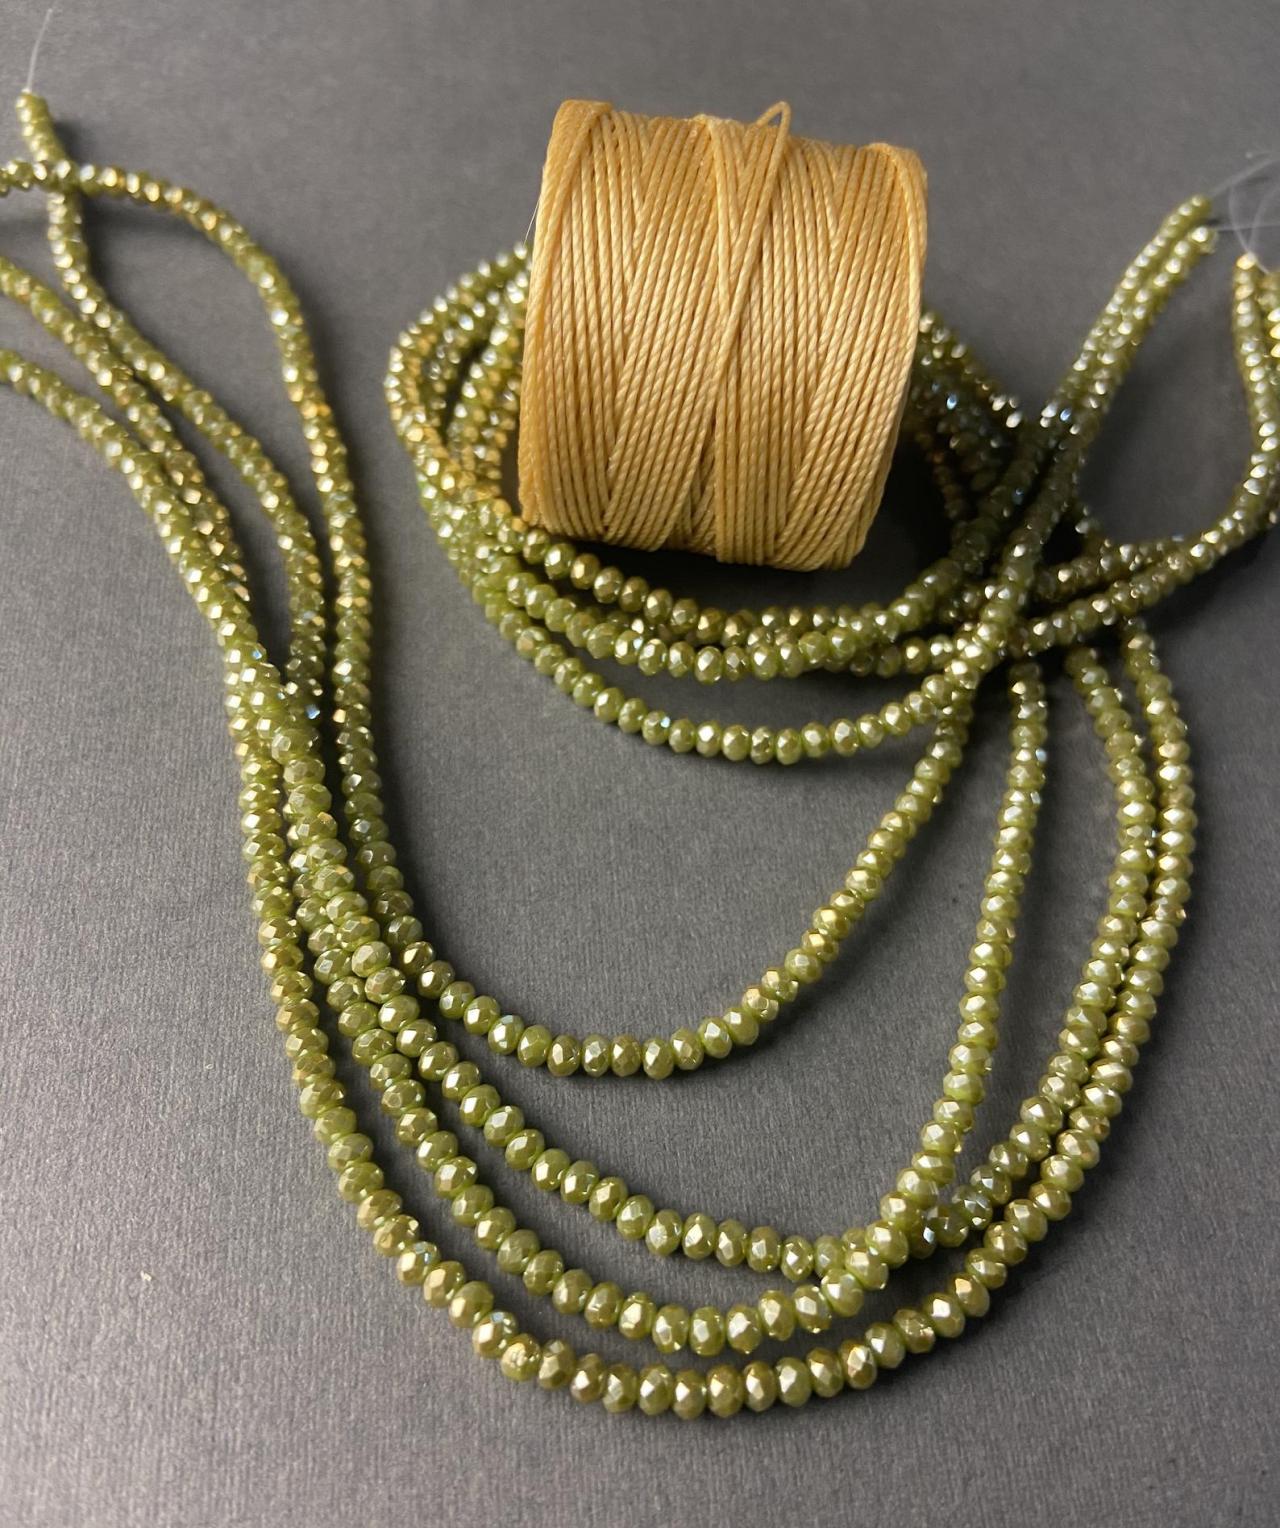 Lot Of 4 Strands Opaque Olive Green Crystal Metallic Sparkle Strand Bead Crochet Kit #37